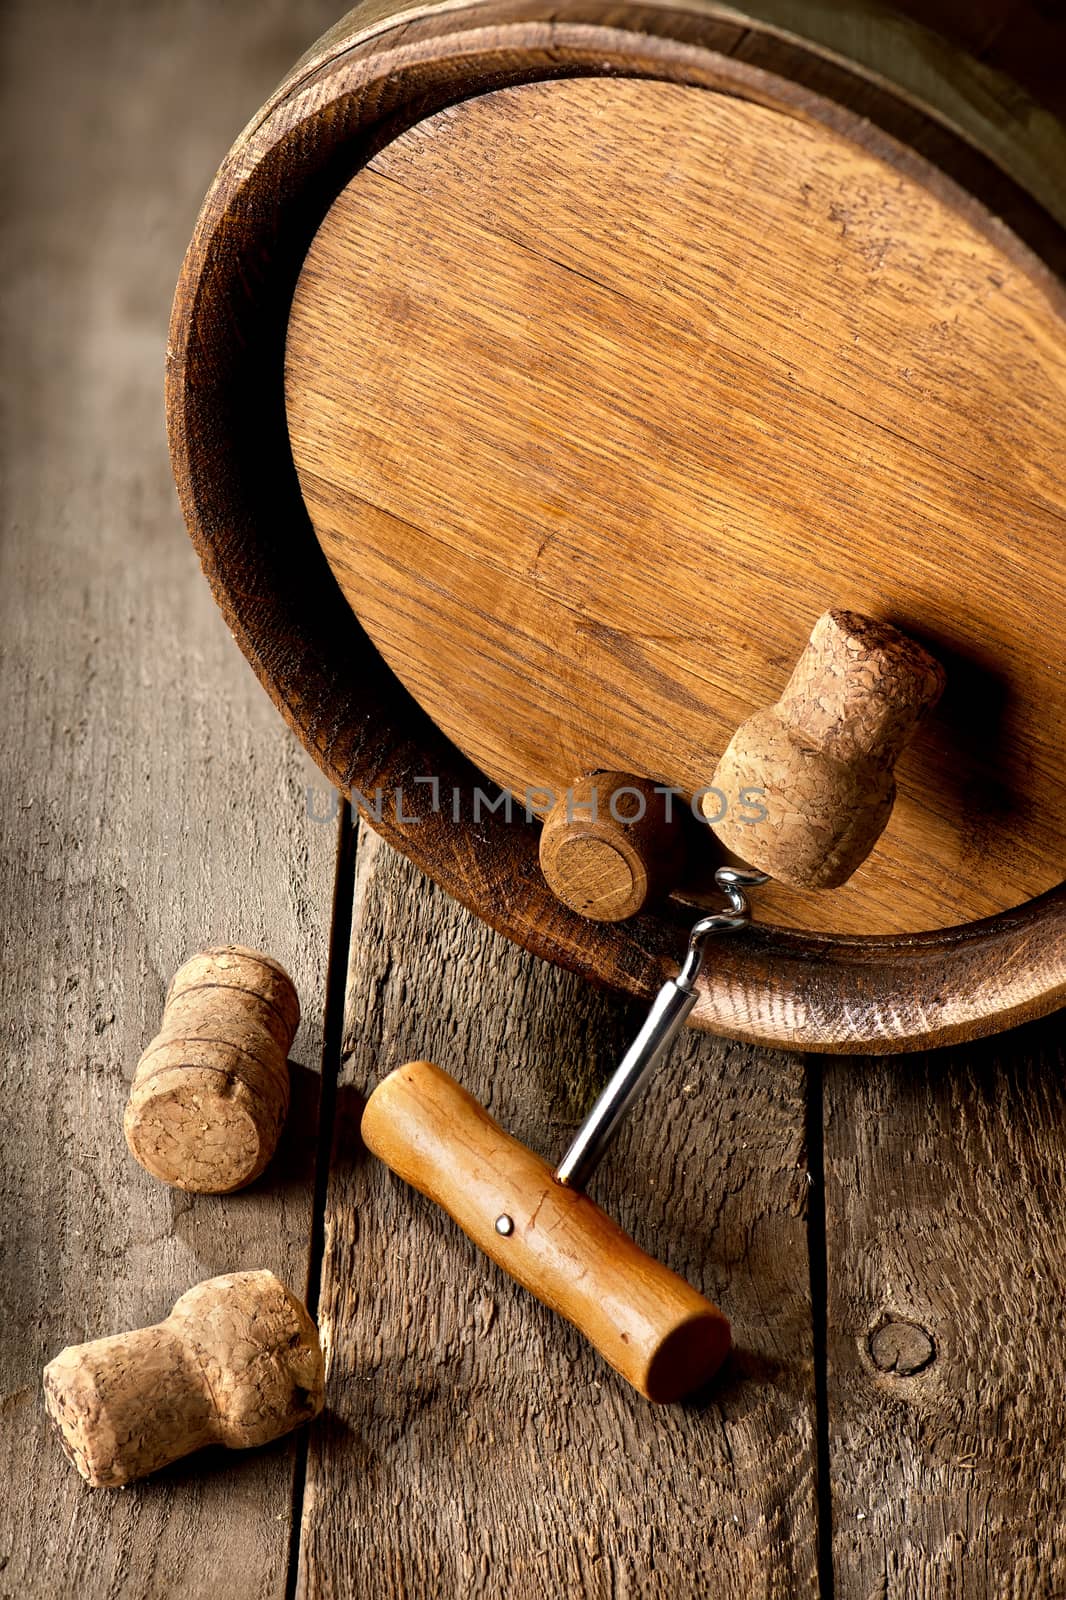 Corkscrew and wooden cask by Givaga